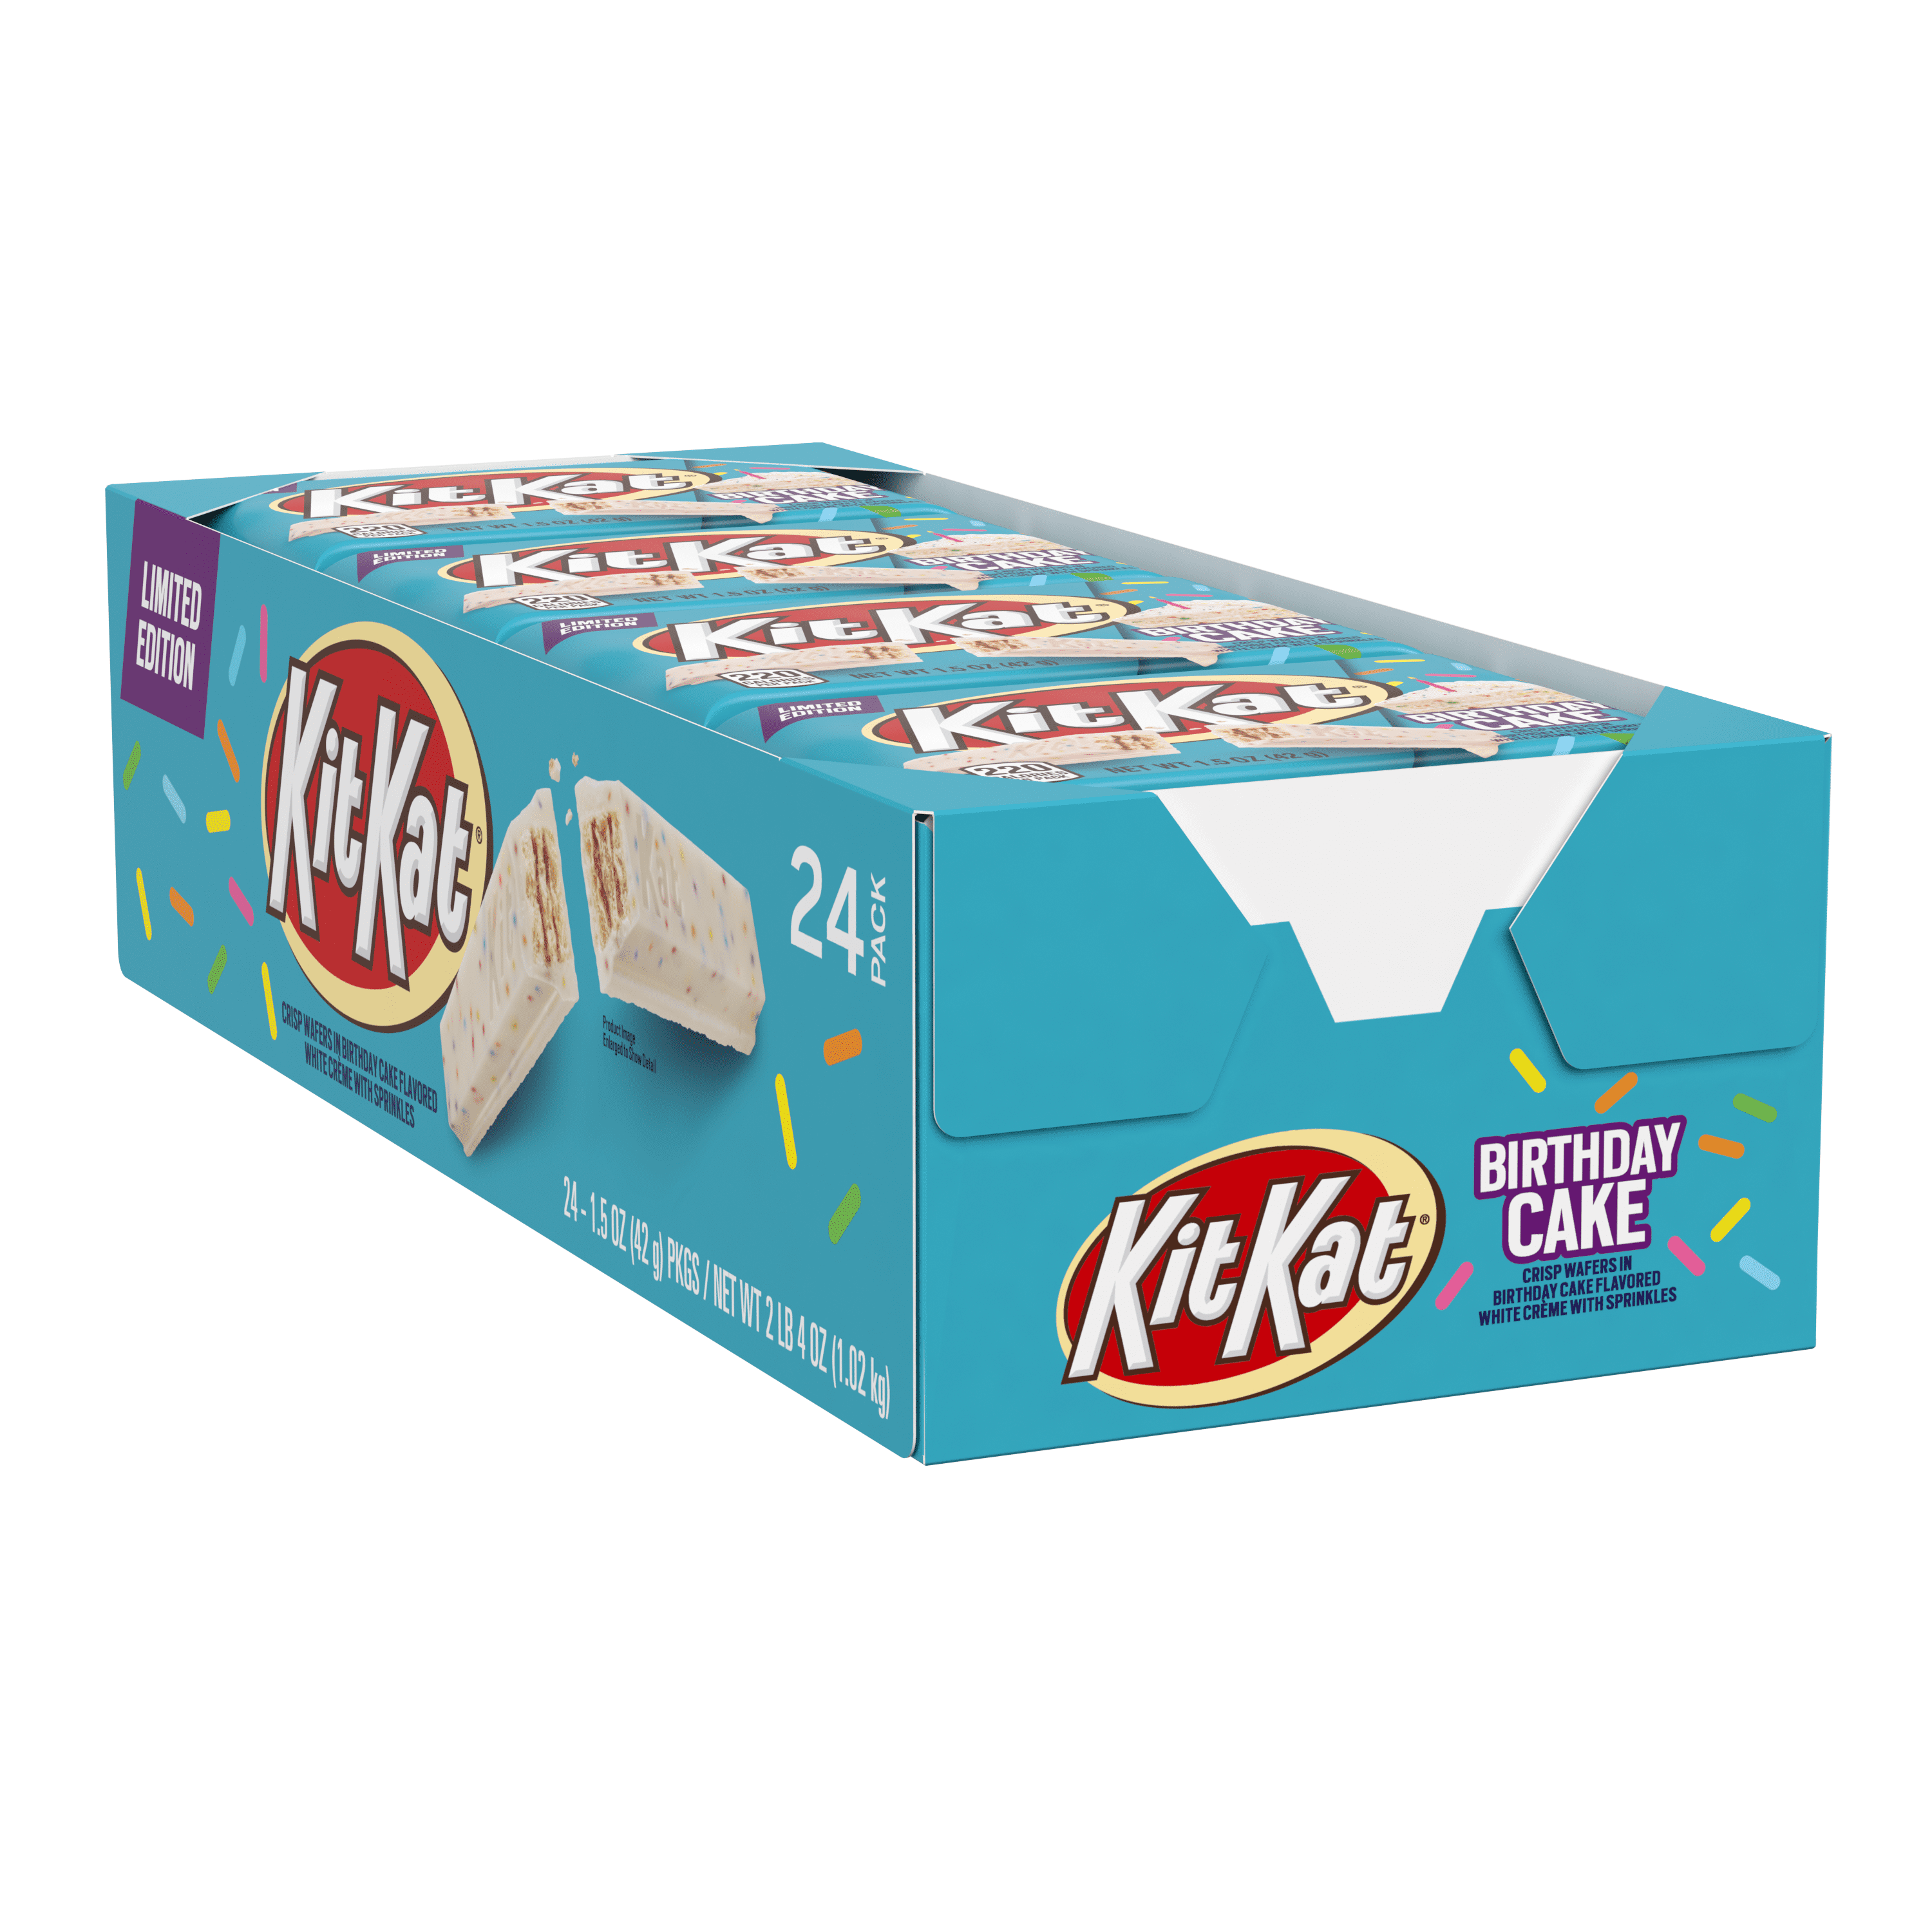 Kit Kat, Limited Edition Crisp Wafers in Birthday Cake Flavored White Crème with Sprinkles Candy Bar Box, 1.5 Oz, 24 ct. - Walmart.com